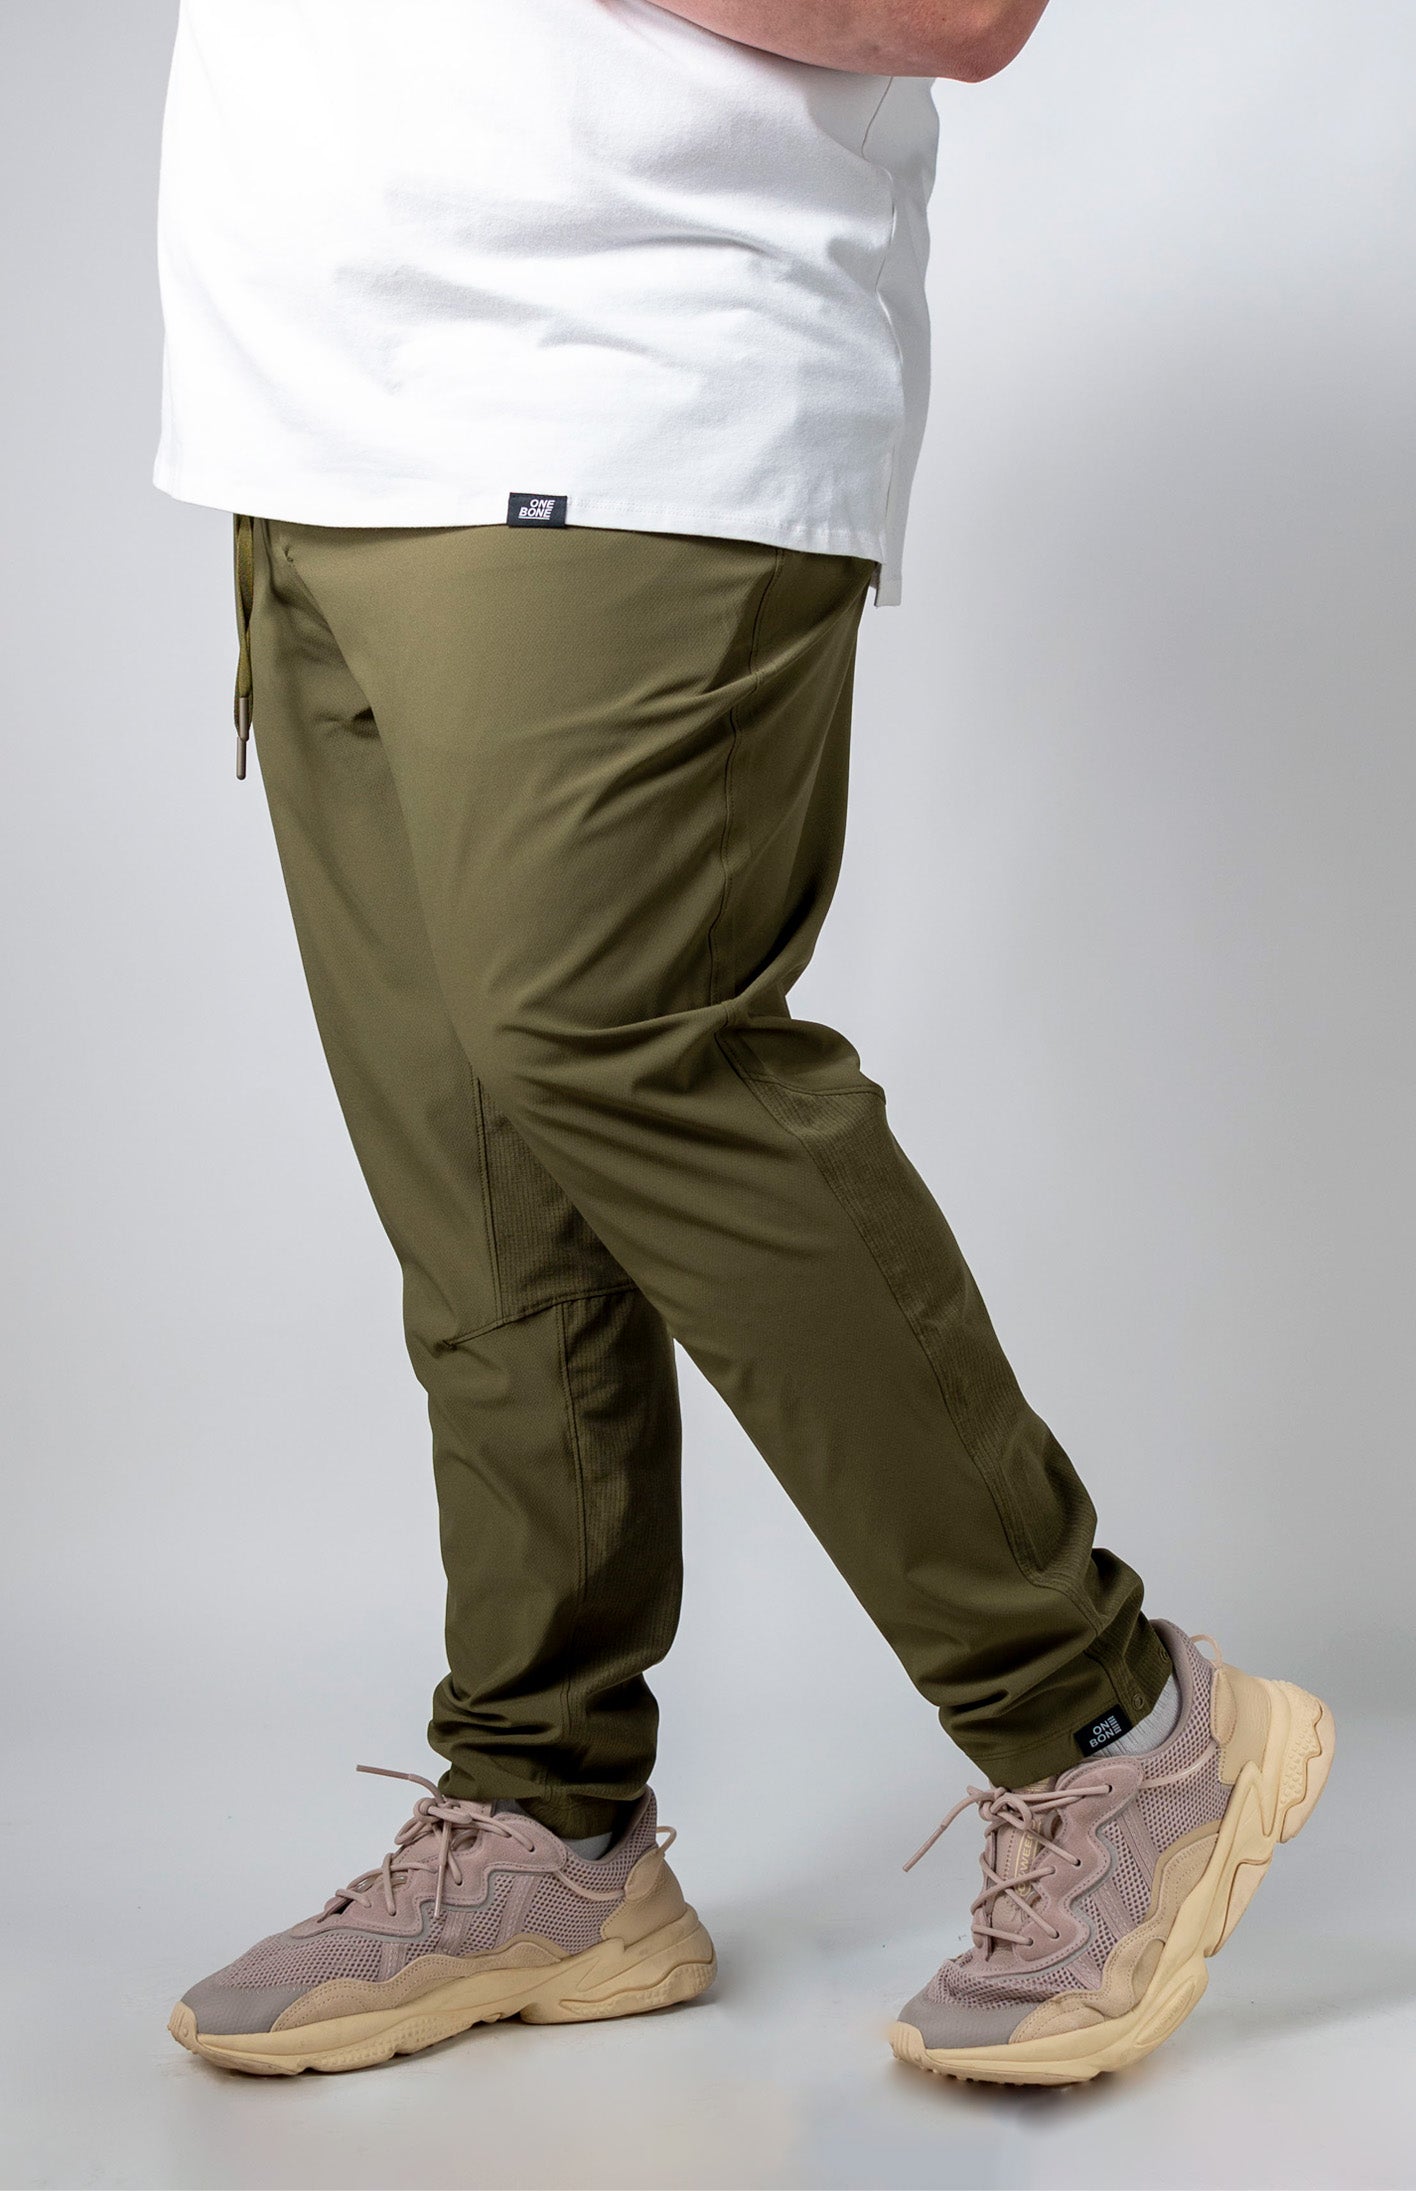 Big and Tall Men's Chino Pants size 3XL-7XL Waist From 42 50 Inches -   Canada